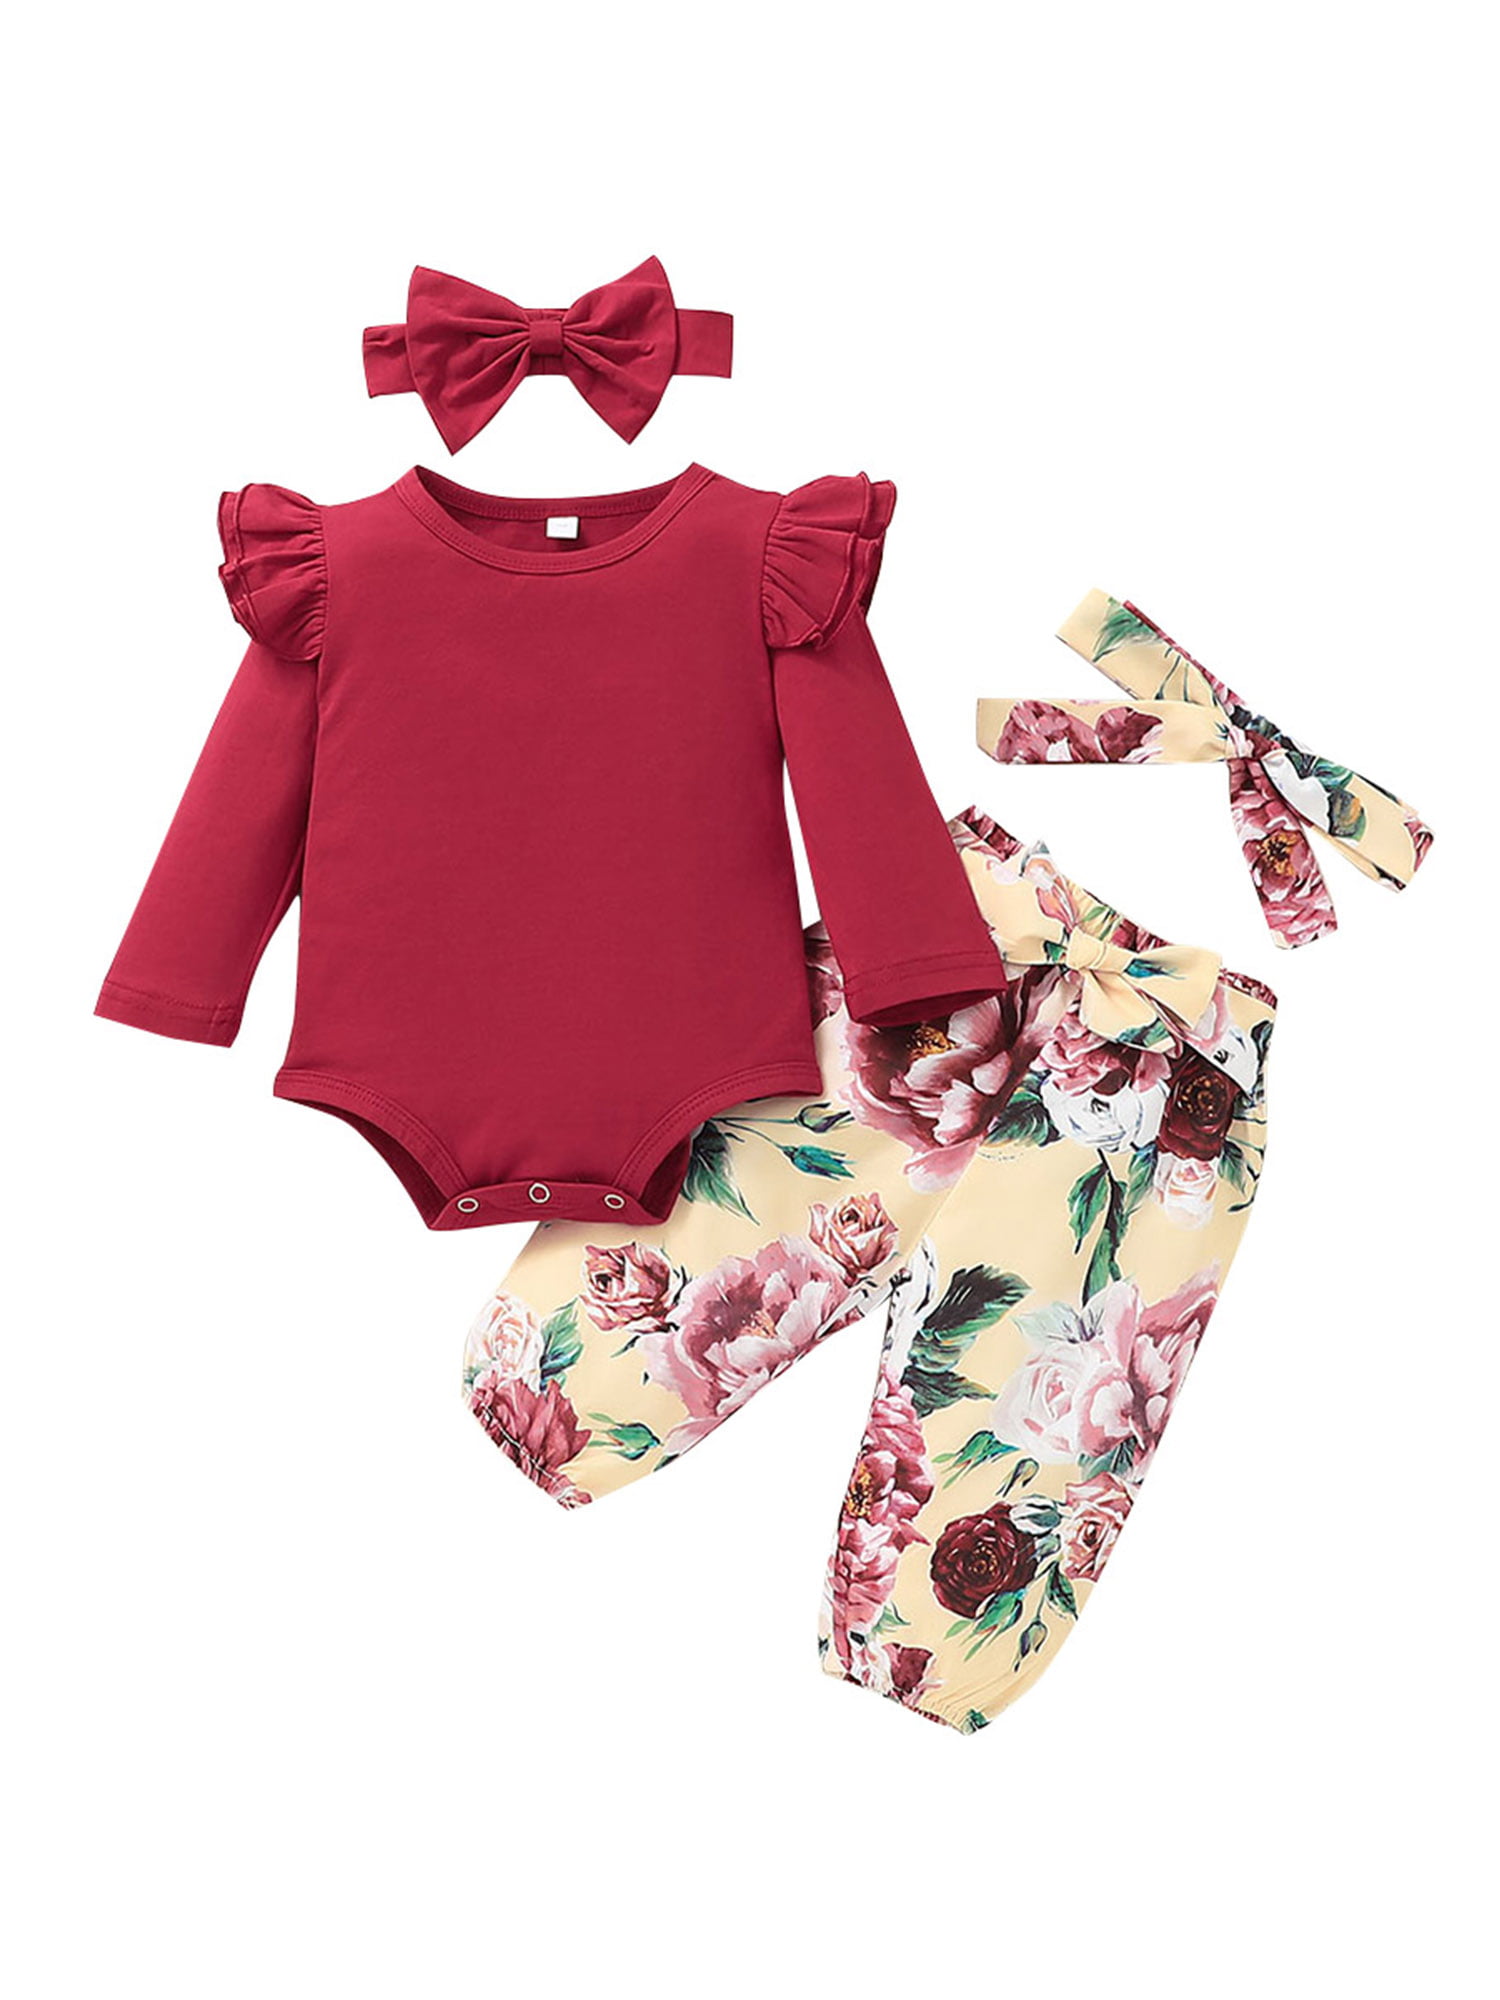 LAPA Toddler Baby Girls Long Sleeve Romper Jumpsuit Pants Headband Outfits Sets 